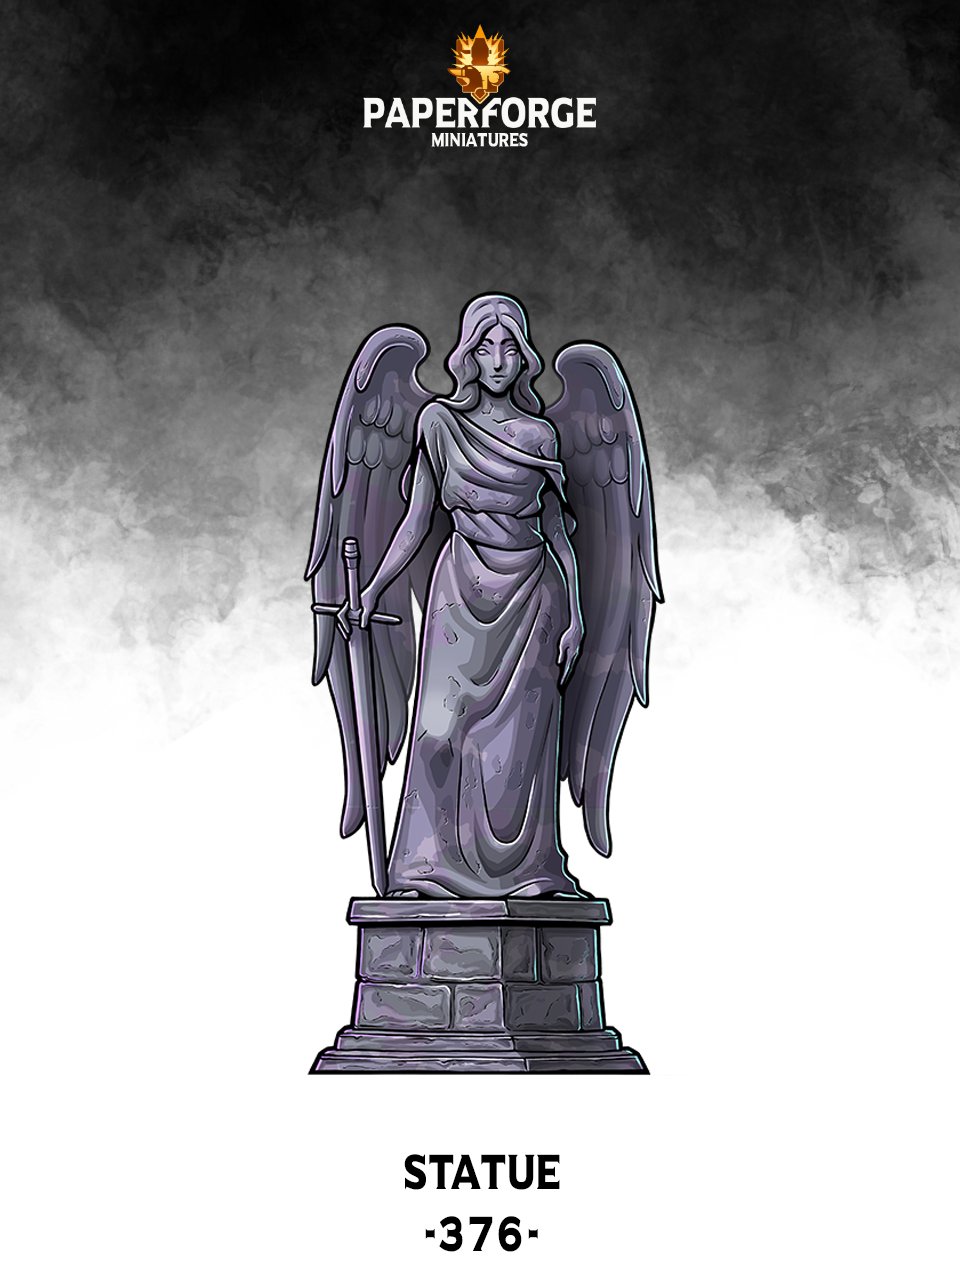 PaperForge on Twitter: "The Statue [Environment Prop] is out now! You can  get the Paper mini and #VTT tokens here : https://t.co/SaMWVIfFir #ttrpg  #dnd #rpg https://t.co/Zs3xroH9dr" / Twitter